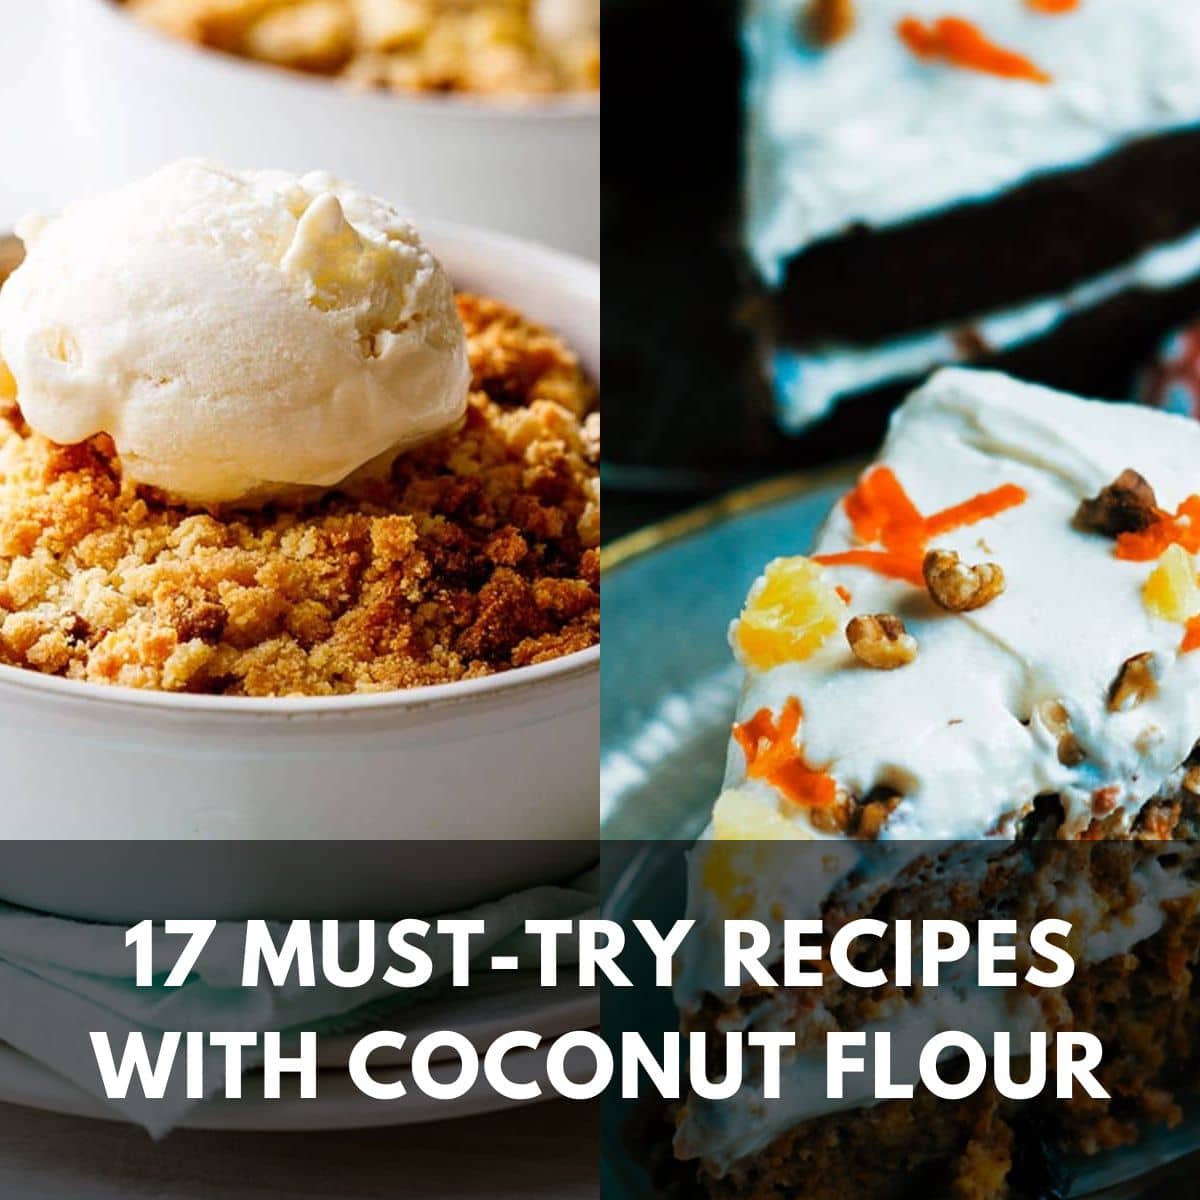 17 must try recipes with coconut flour featured